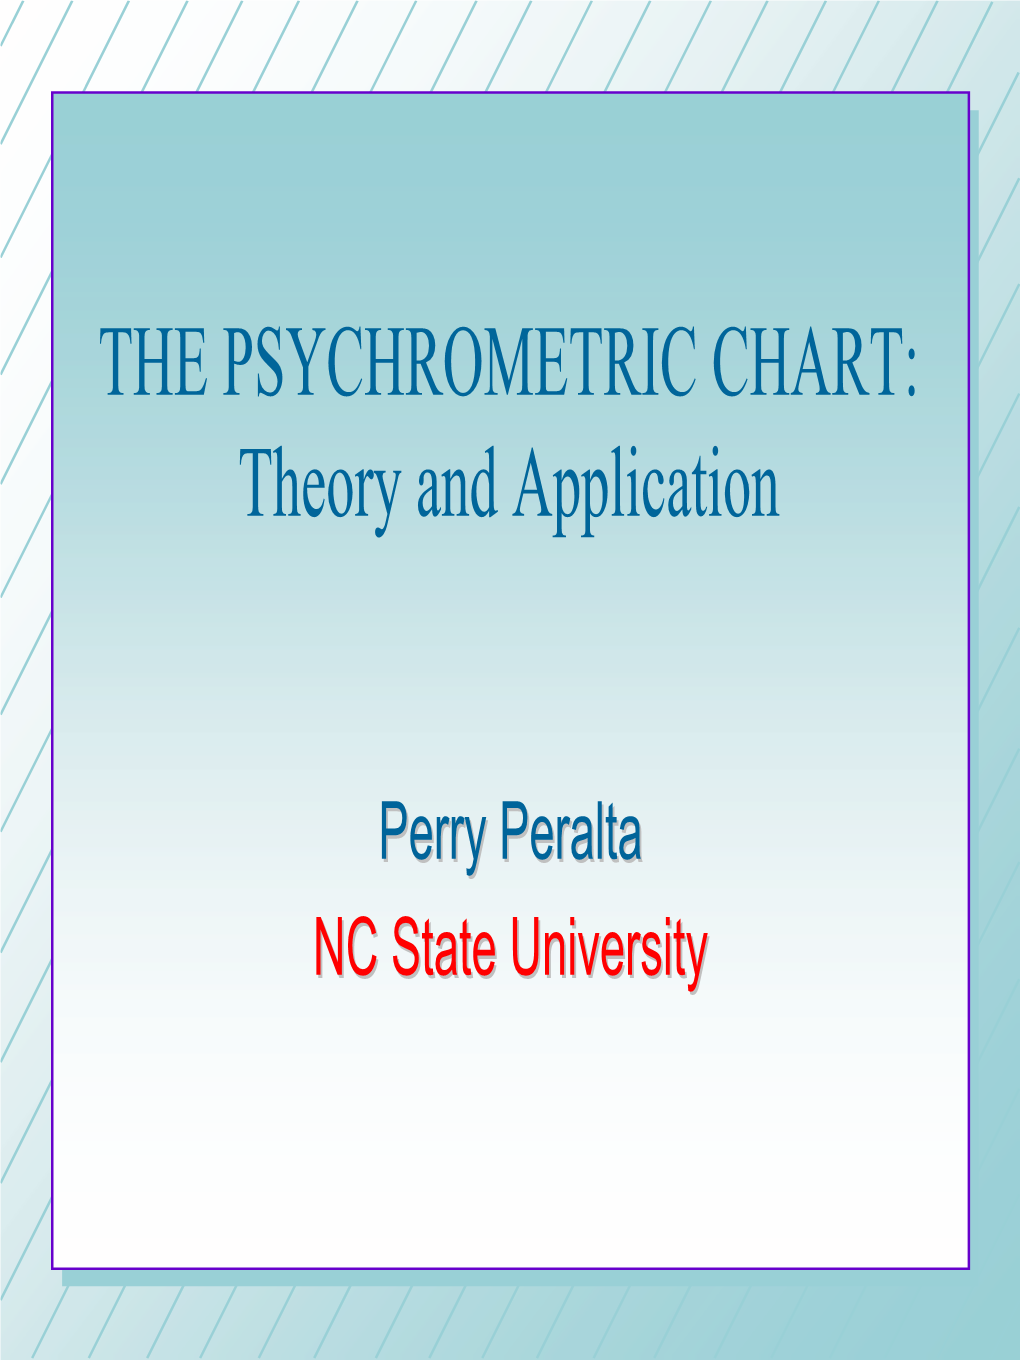 THE PSYCHROMETRIC CHART: Theory and Application